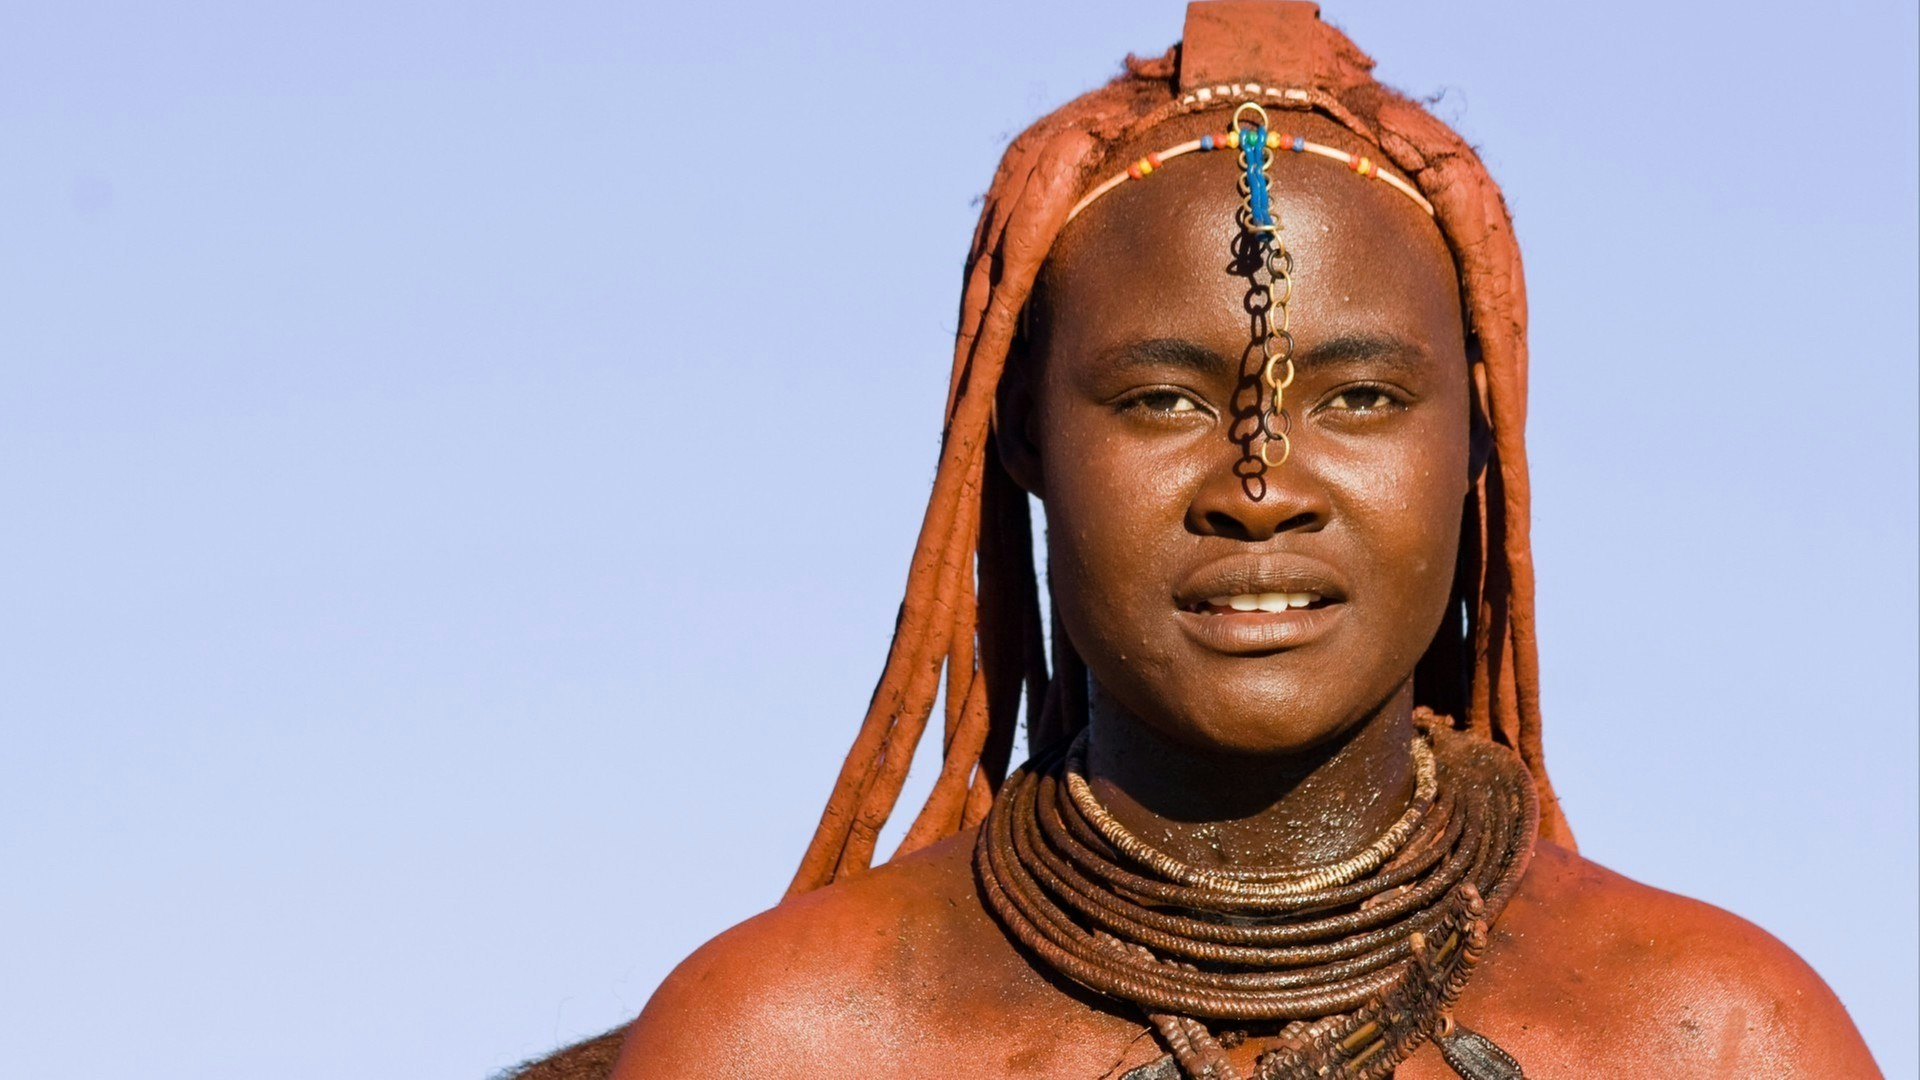 Portrait of a native Himba woman, Namibia